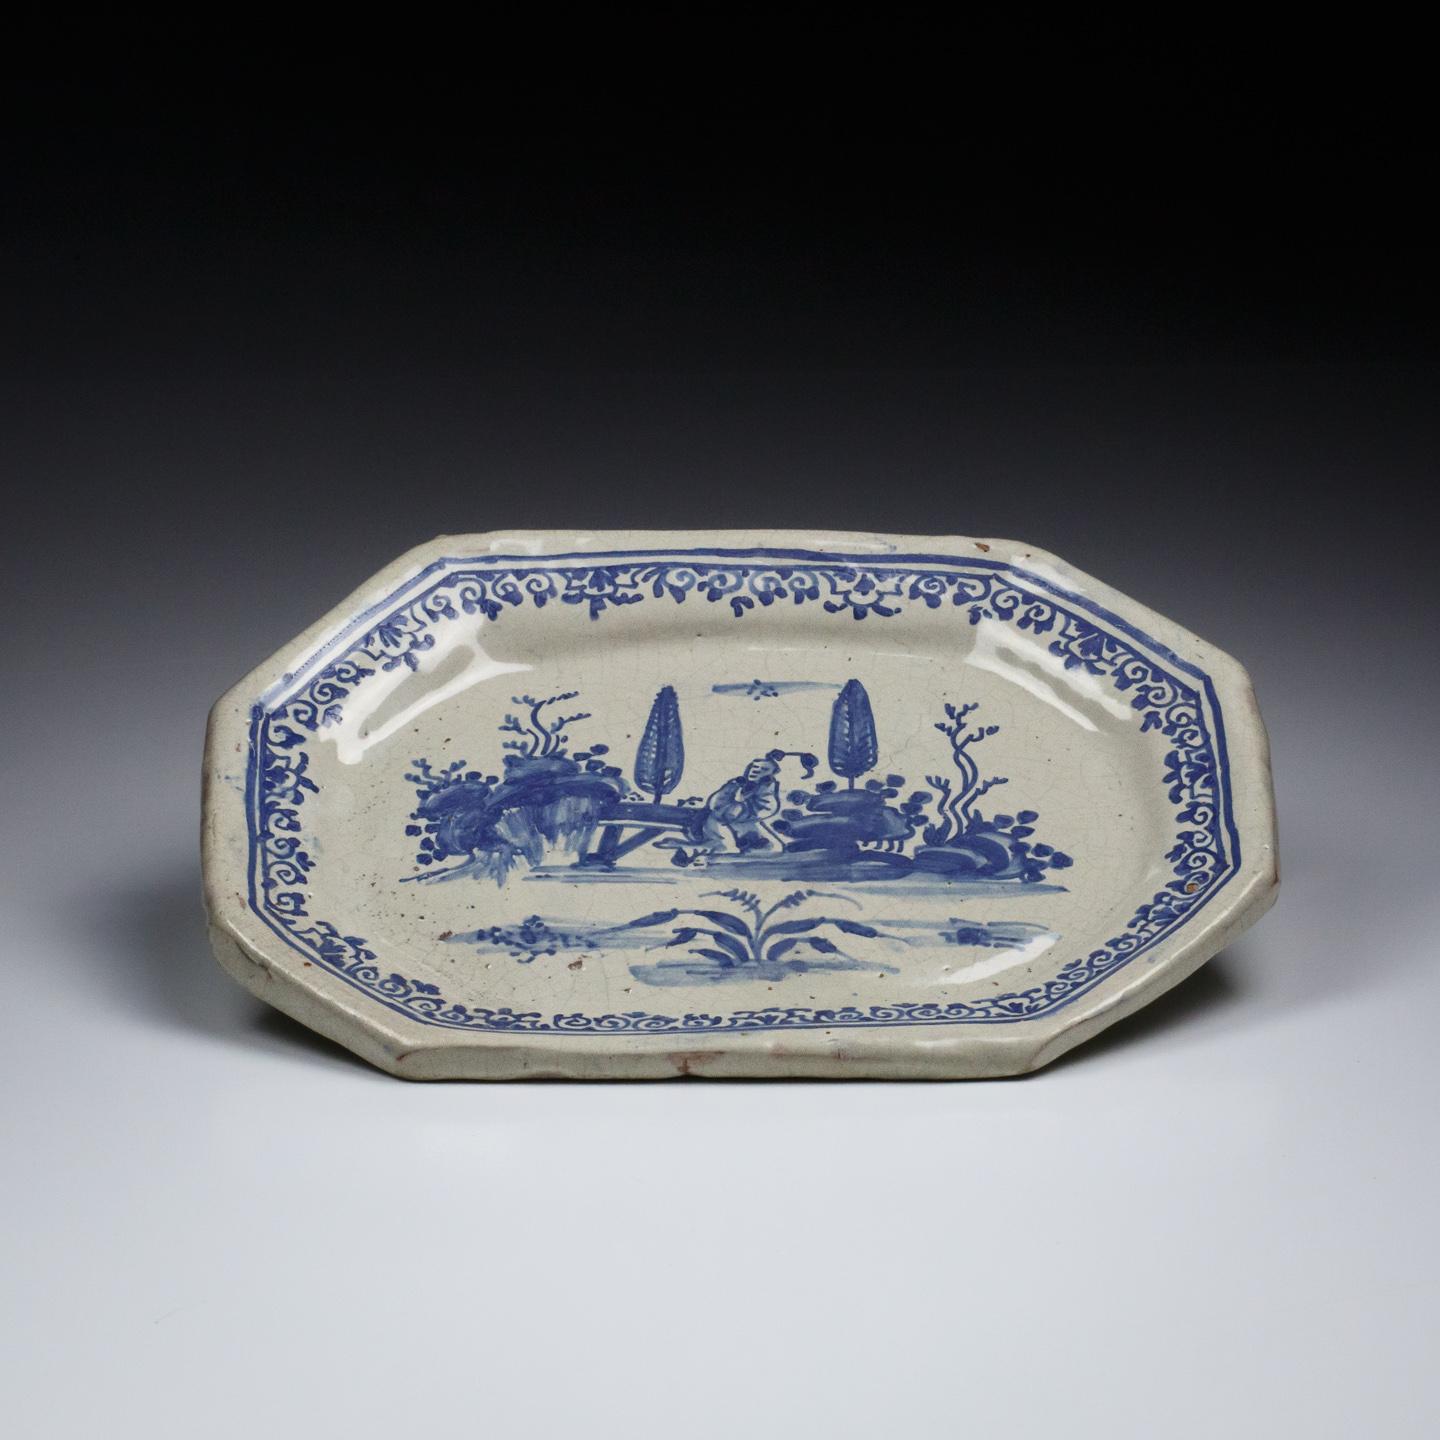 Late 18th Century Italian Blue and White Chinoiserie Charger.
Excellent condition.

Italy Circa 1780